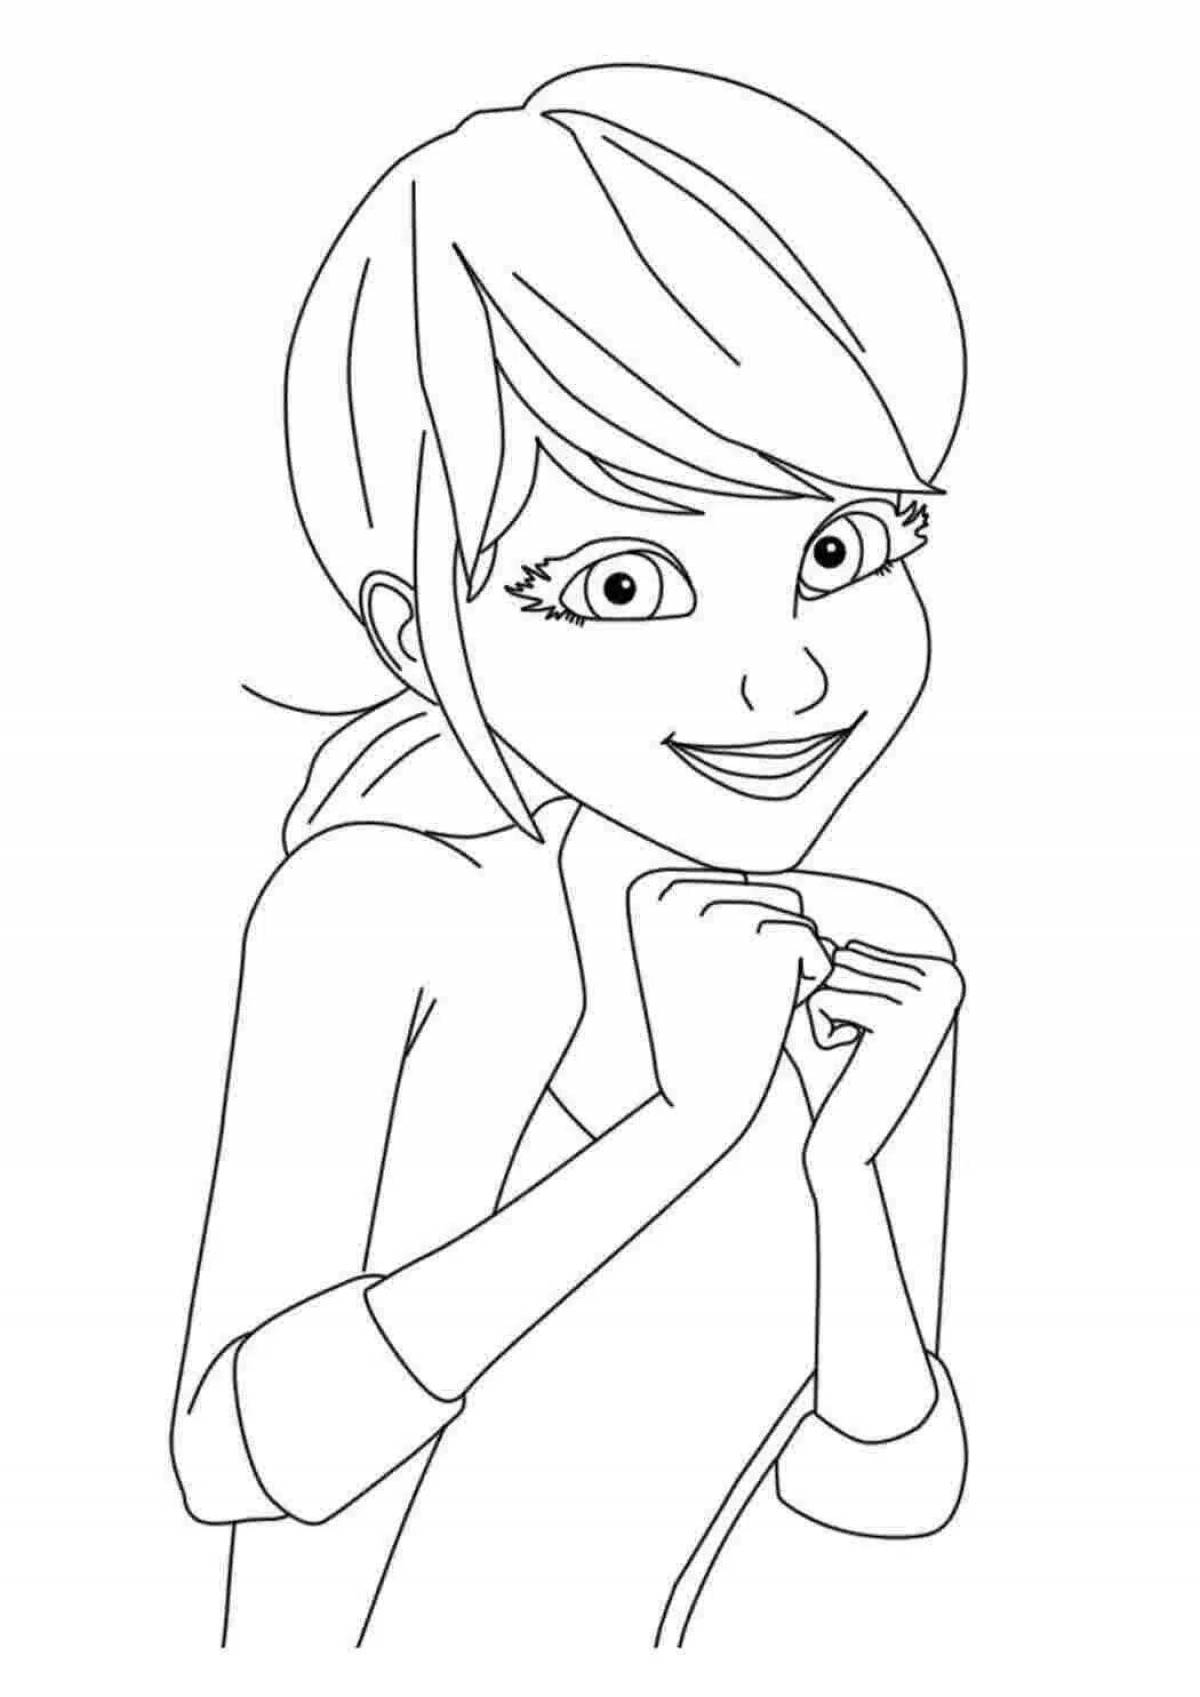 Marinette and Adrian amazing coloring pages